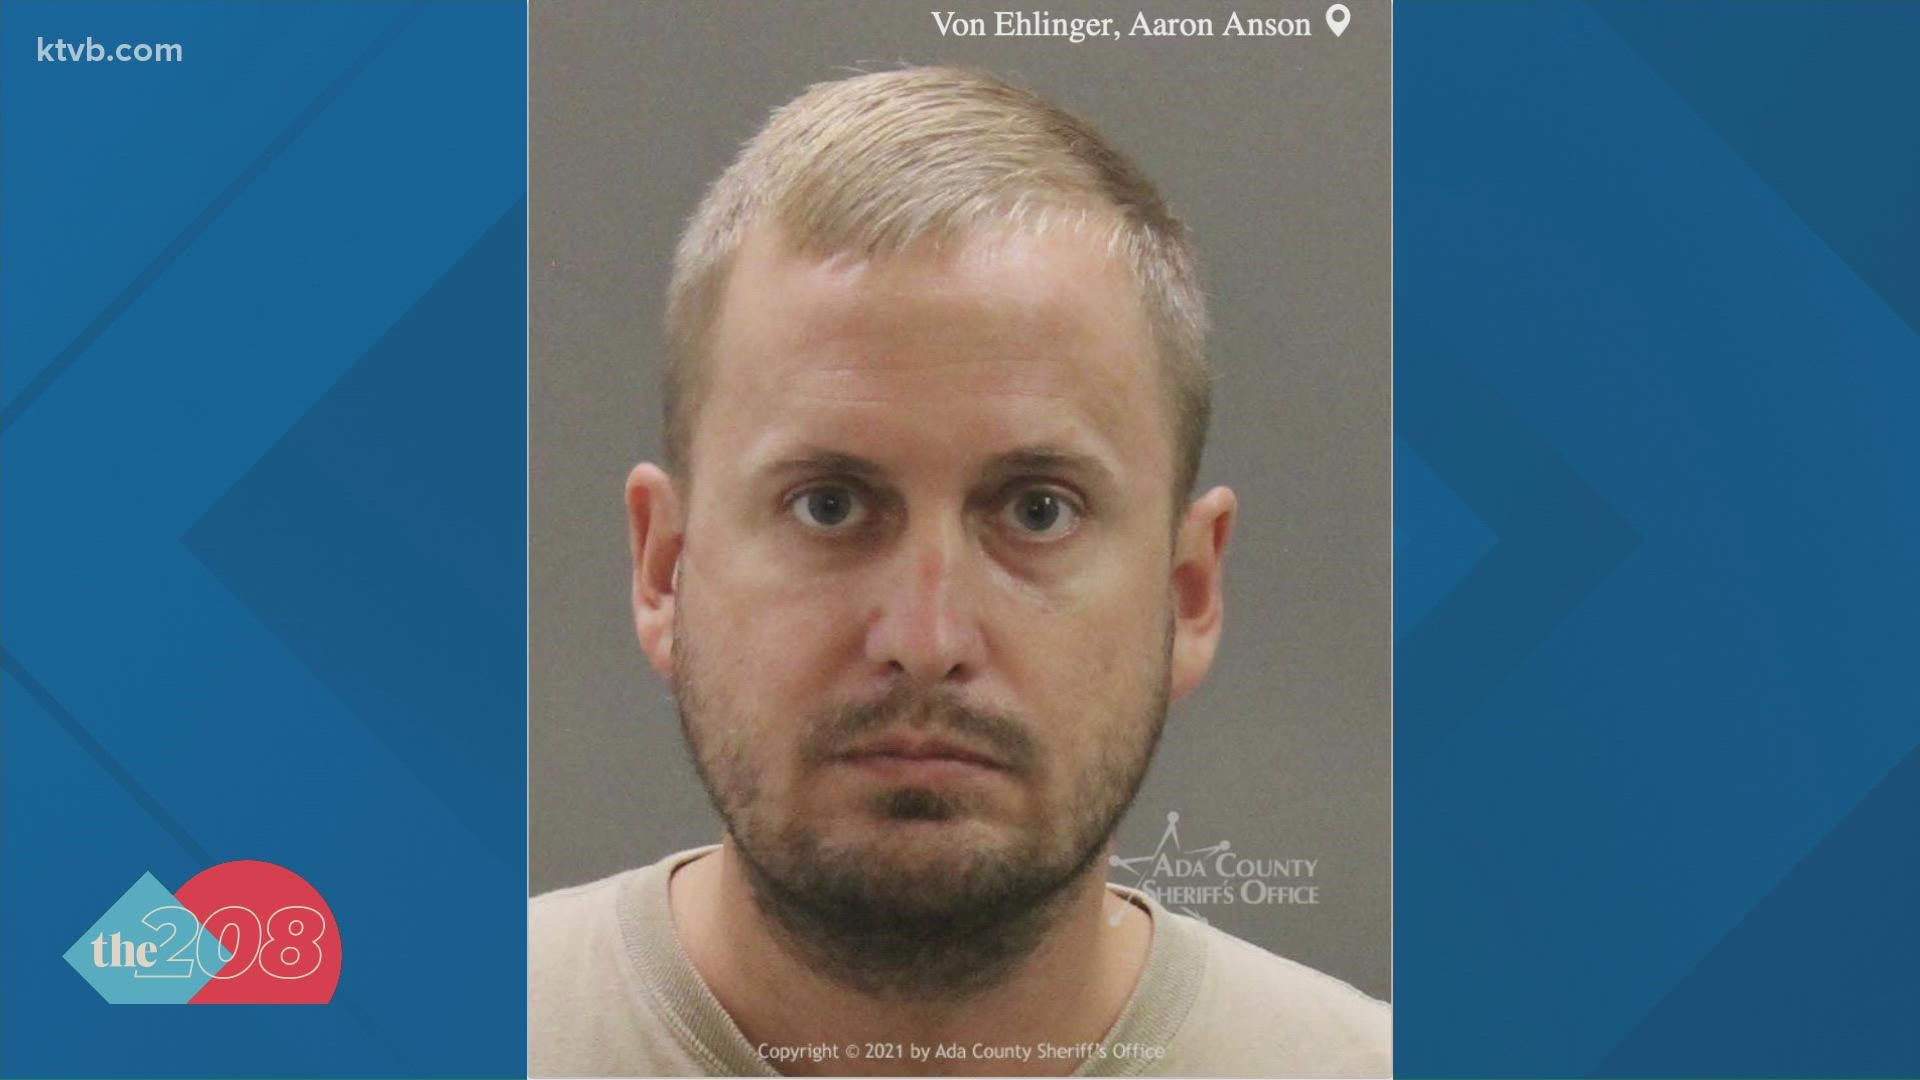 Von Ehlinger, 39, was arrested in Clayton County, Georgia on Saturday, Sept. 27. He faces felony charges in Idaho of rape and forcible sexual penetration.